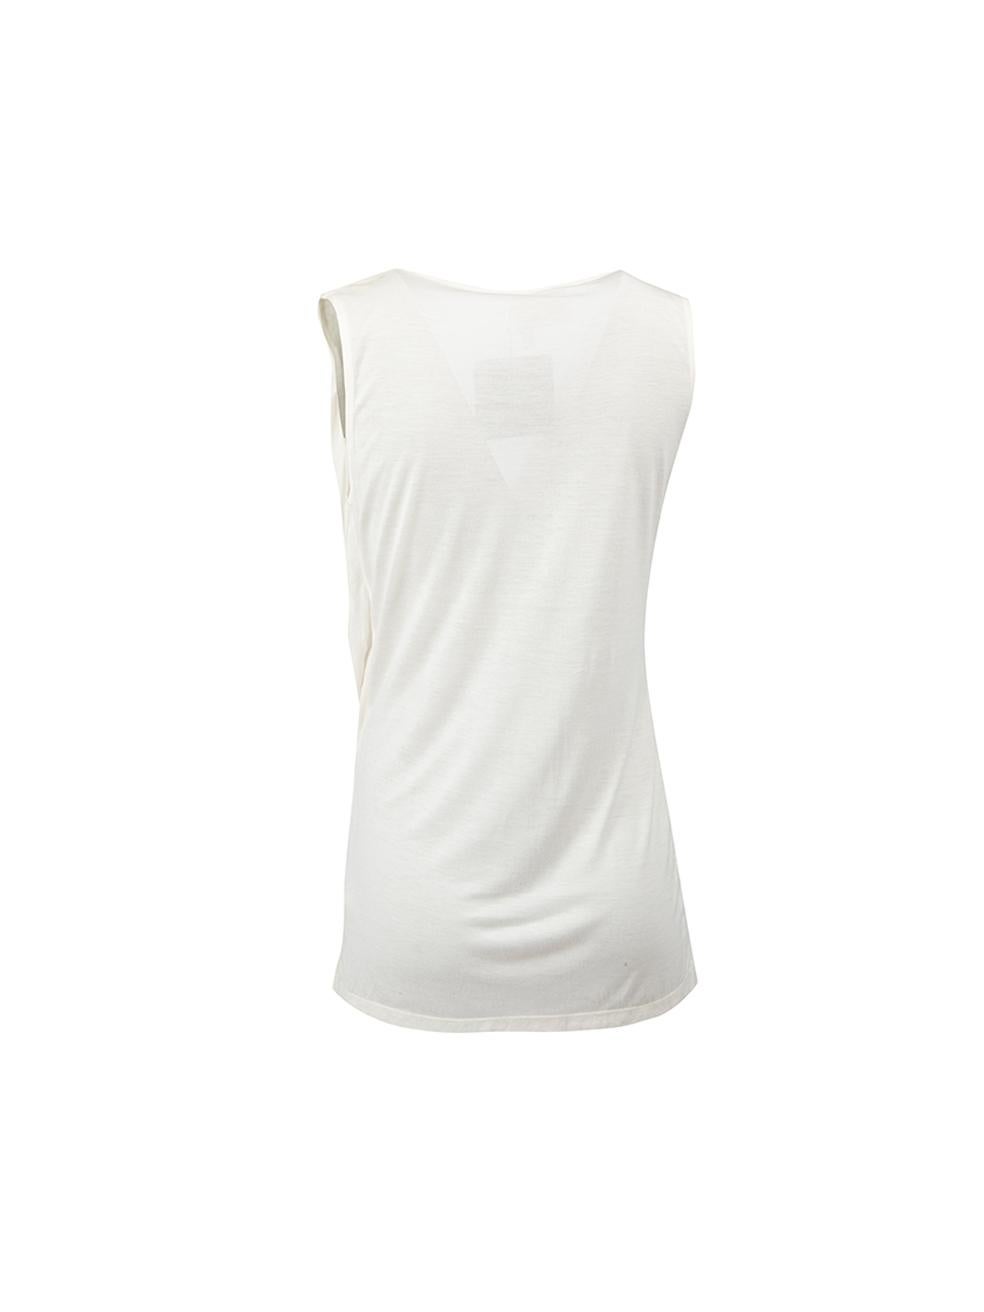 Cream Silver Taping Sleeveless Top Size M In Good Condition For Sale In London, GB